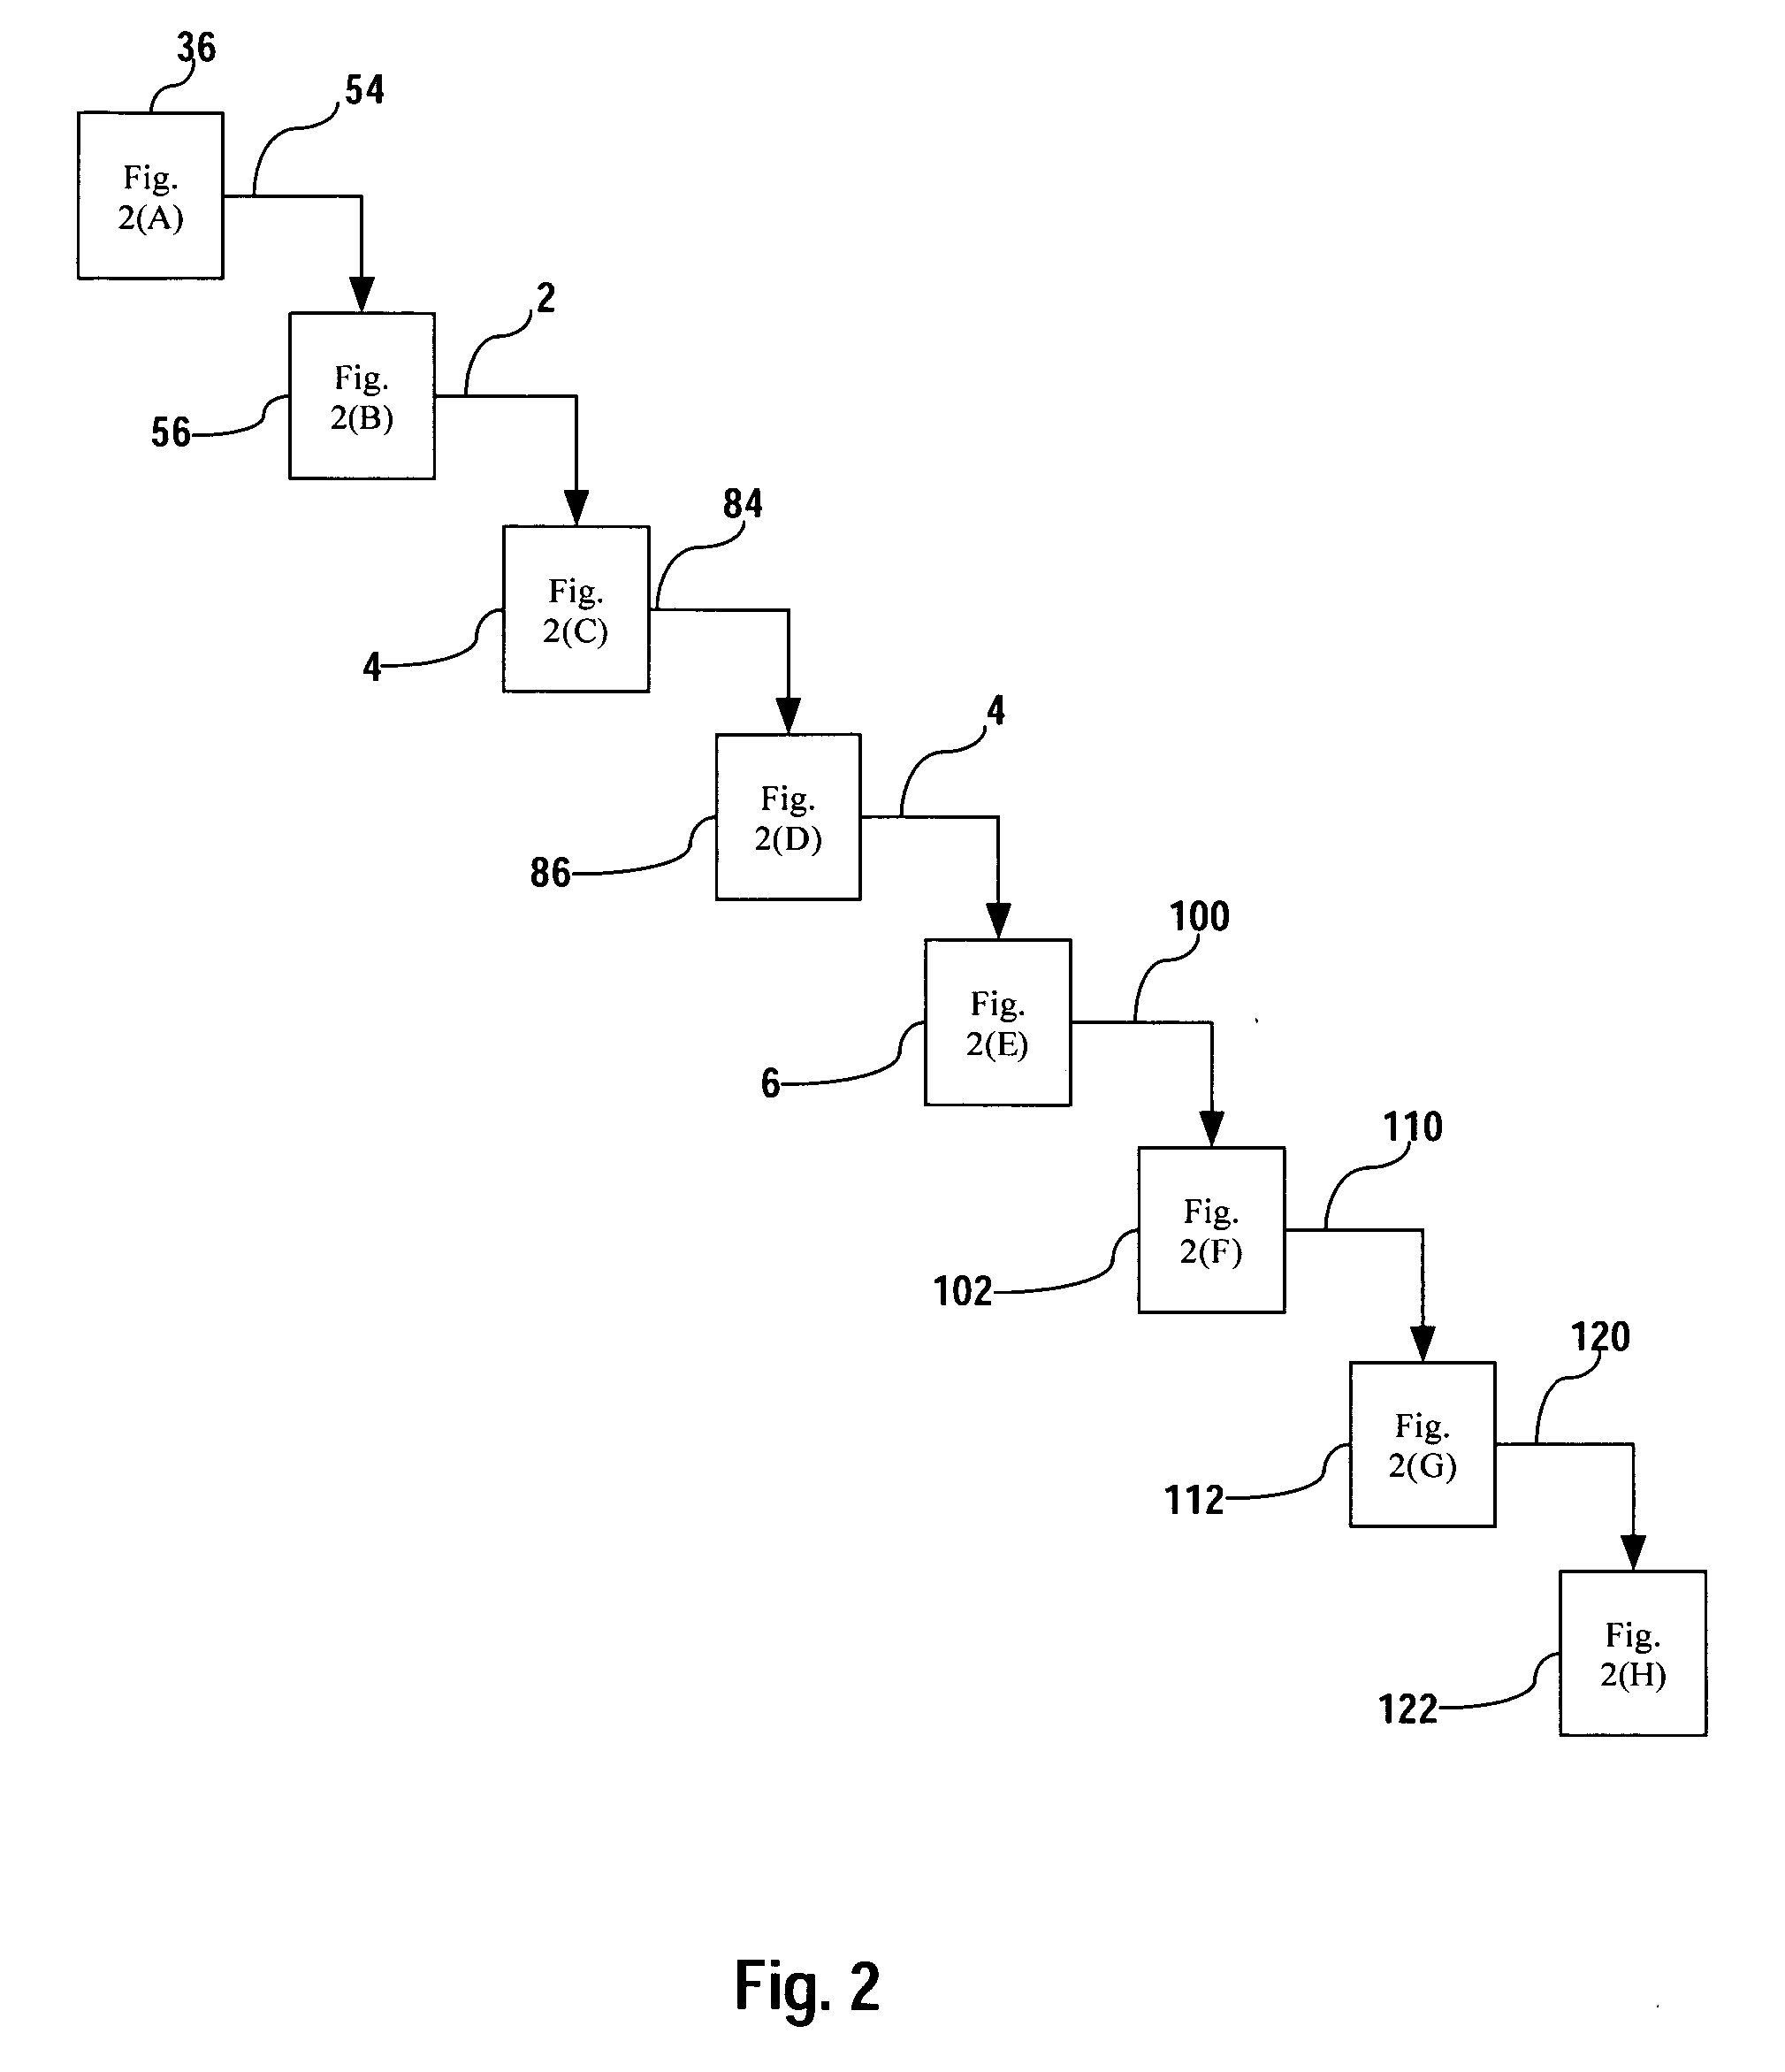 System and method for electronically recording task-specific and location-specific information, including farm-related information